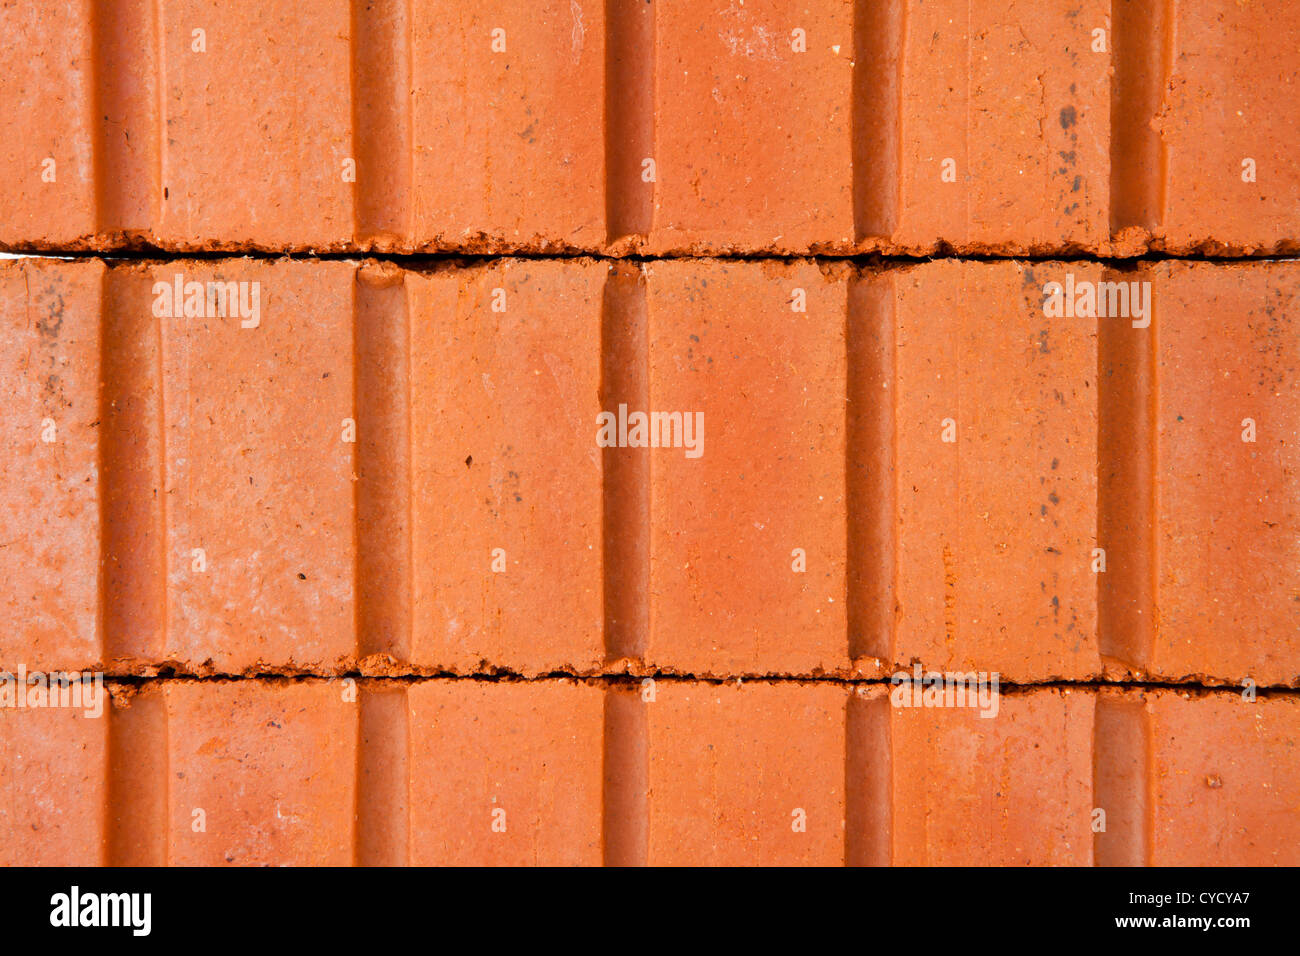 Stack of clay bricks building a wall Stock Photo